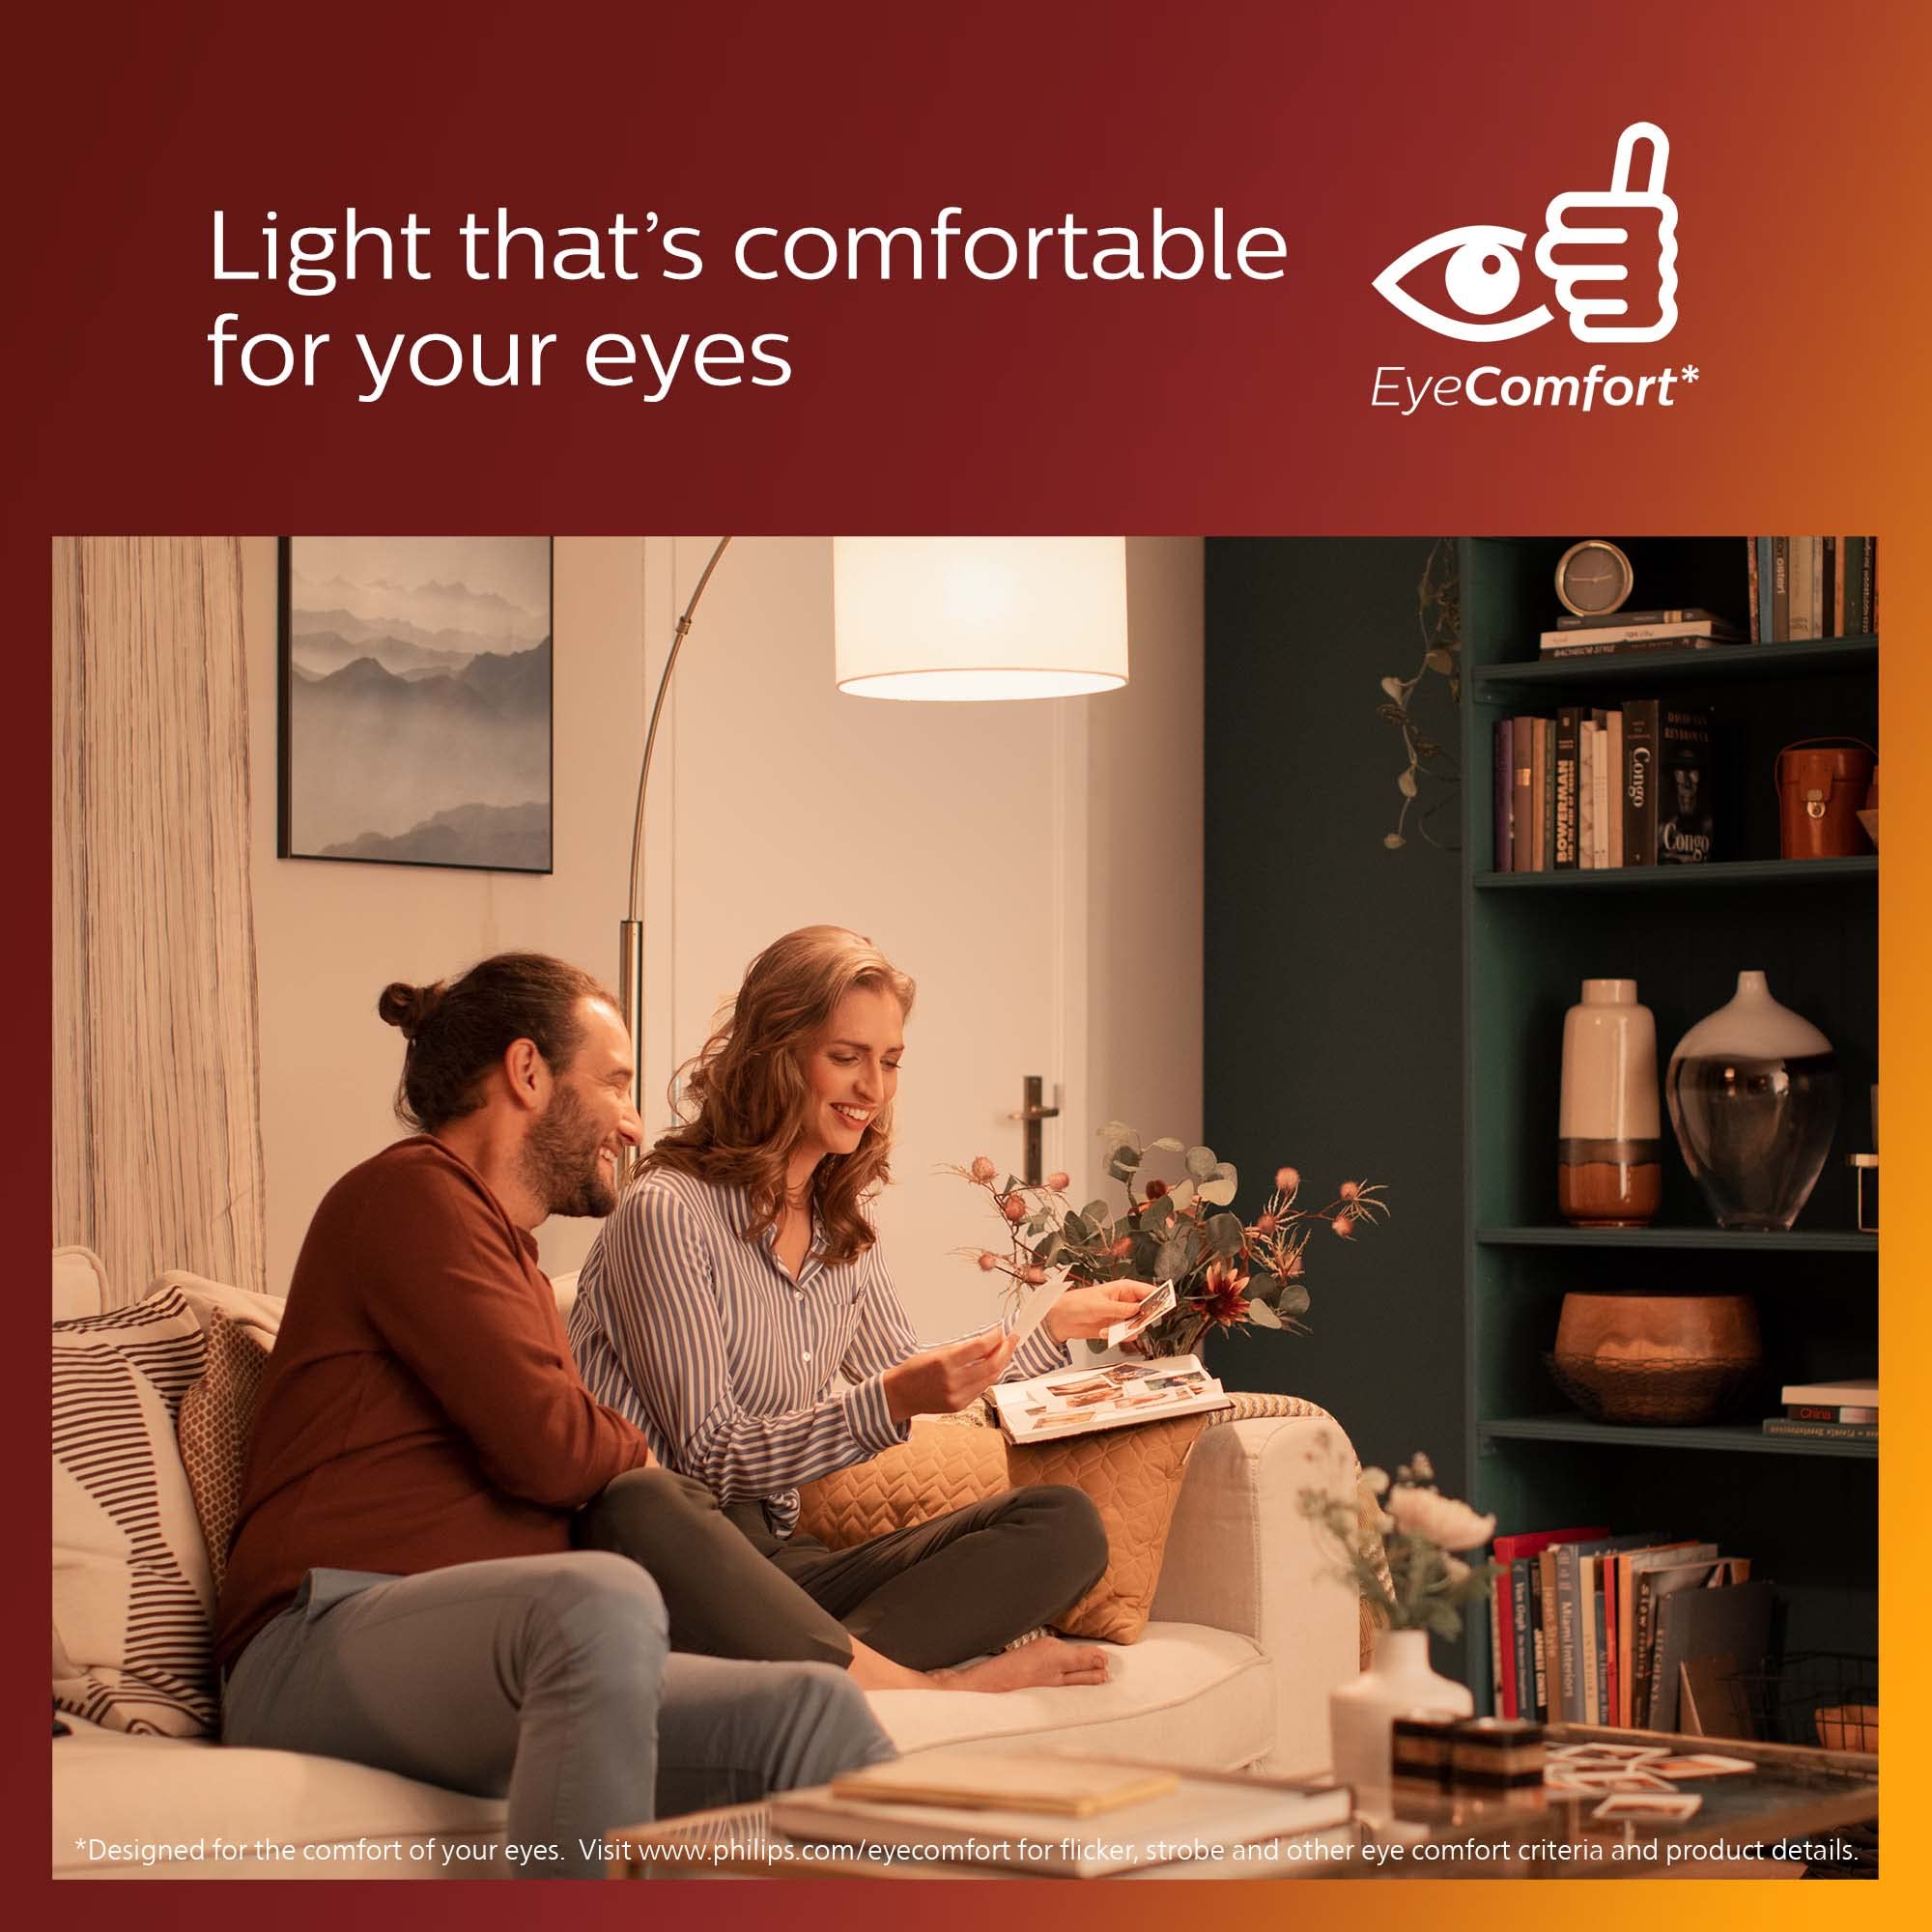 Philips LED Vintage Flicker-Free Amber Spiral G25, Dimmable, Eyecomfort Technology, 400 Lumen, Amber Light(2000K), 6.5W=60W, Title 20 Certified, E26 Base, 4-Pack (565887)